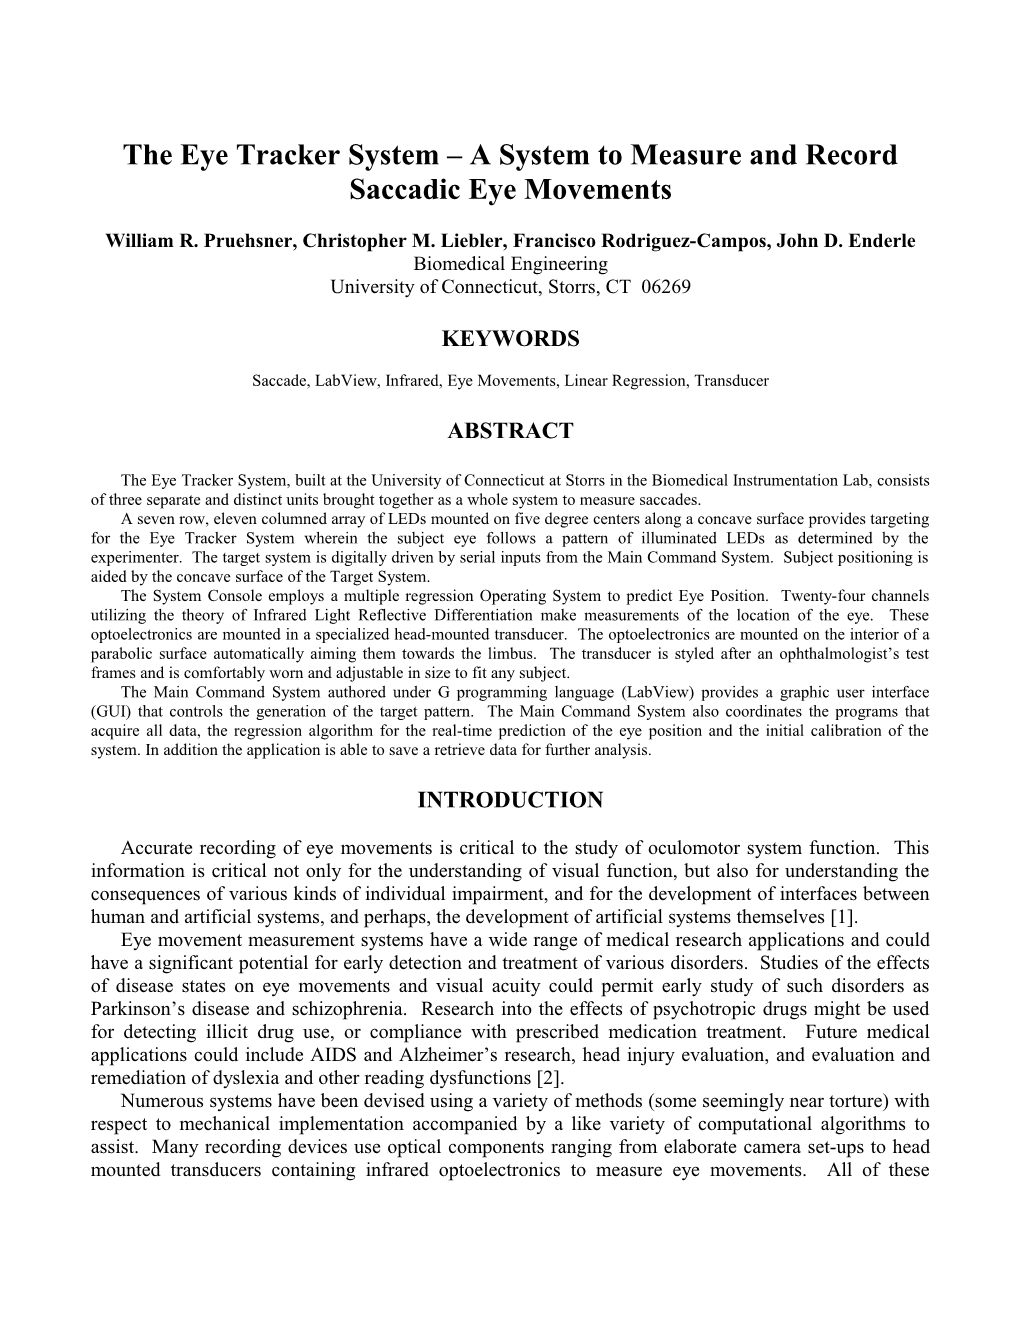 Accurate Recording of Eye Movements Is Critical to the Study of Oculomotor System Function